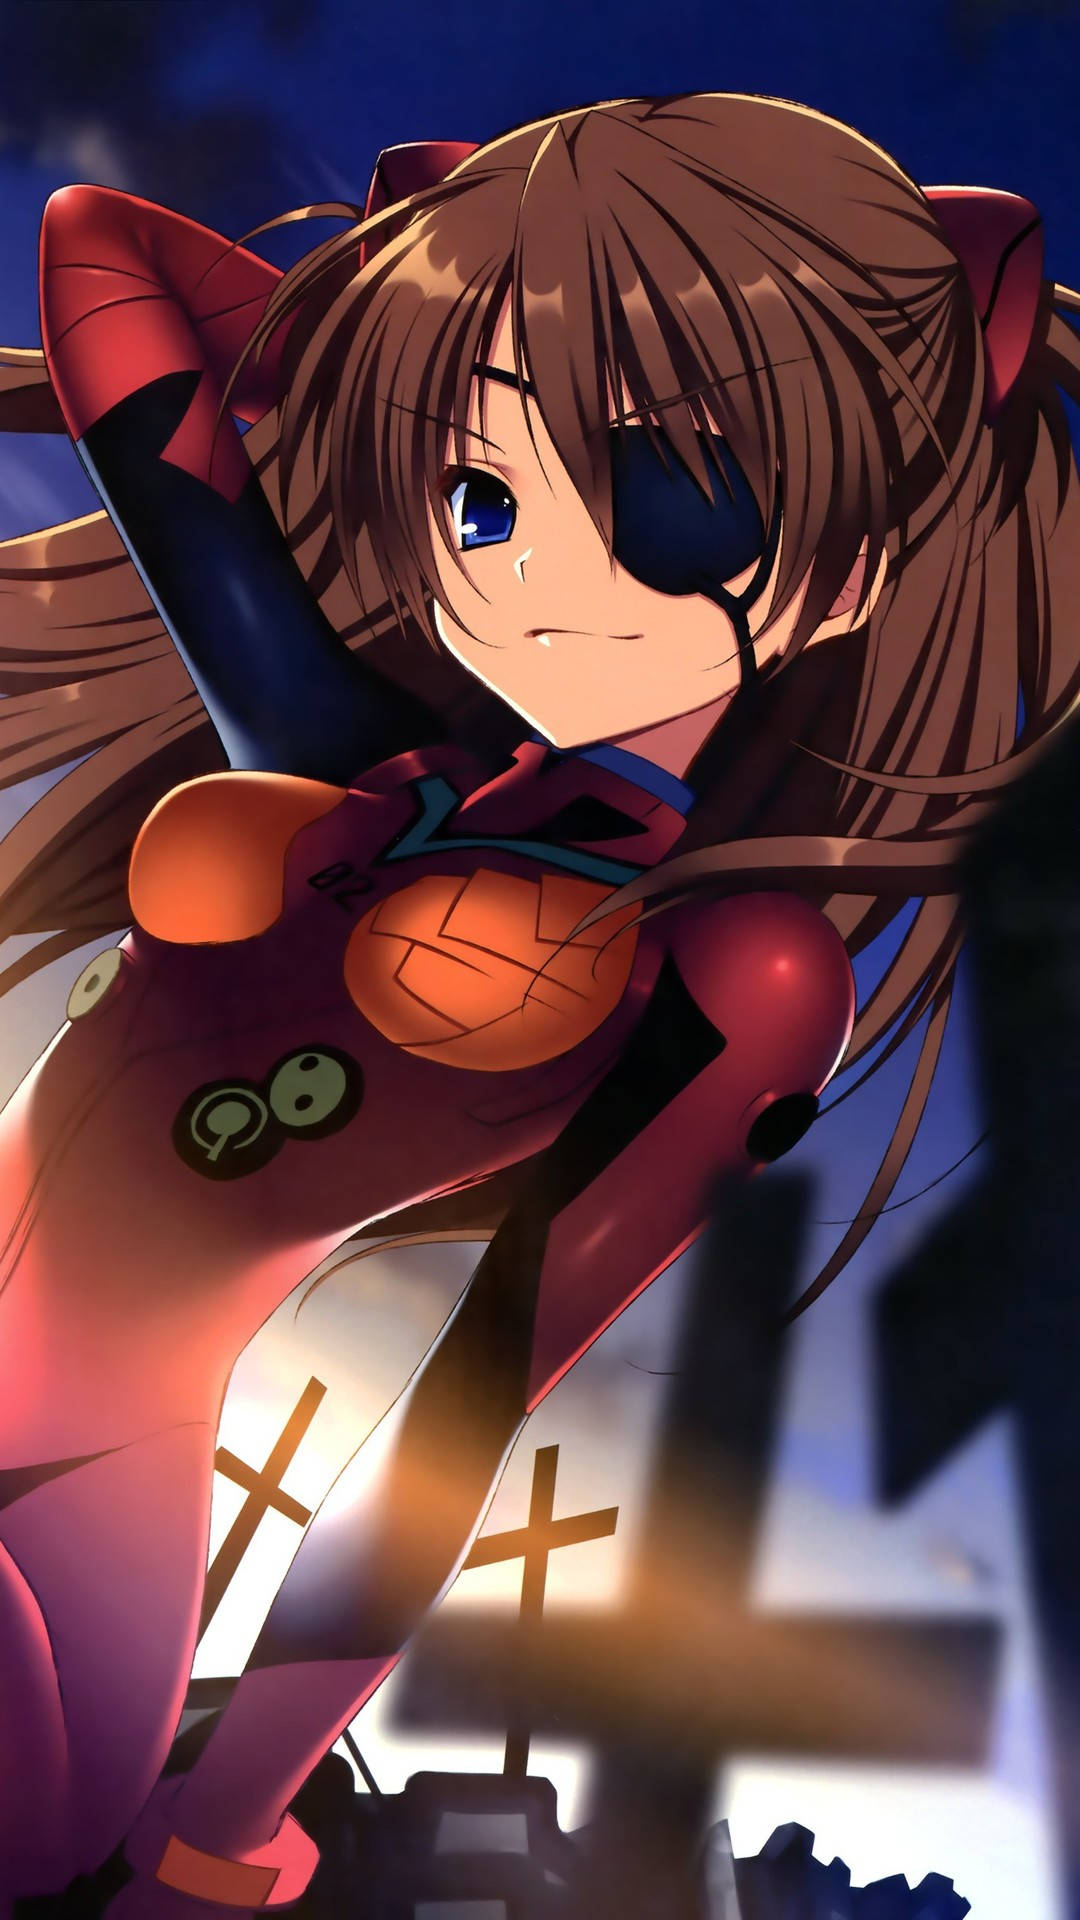 "Bringing Neon Genesis Evangelion style luxury to your mobile lifestyle." Wallpaper